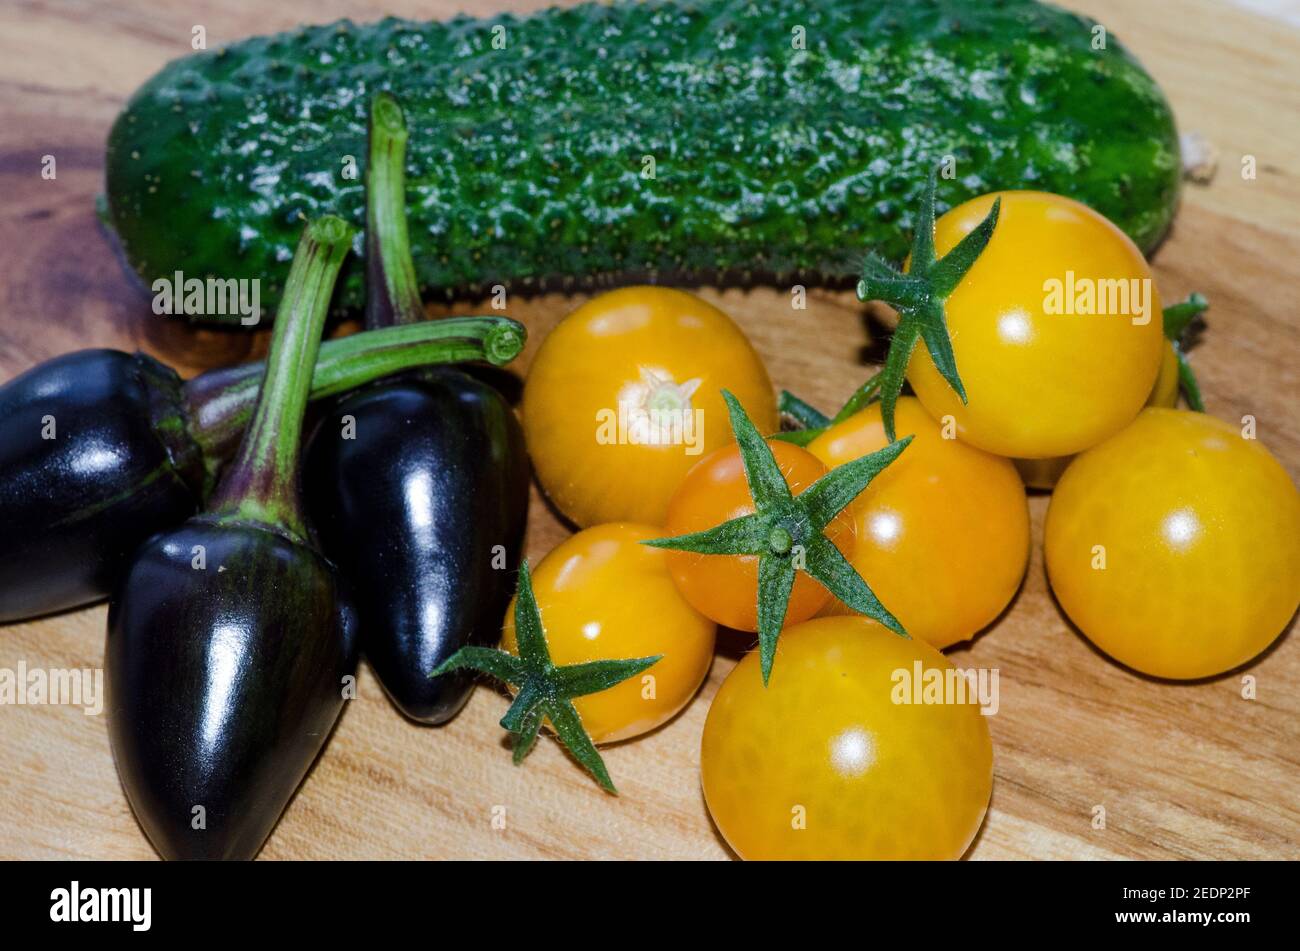 Home grown vegetables in Greenland Stock Photo